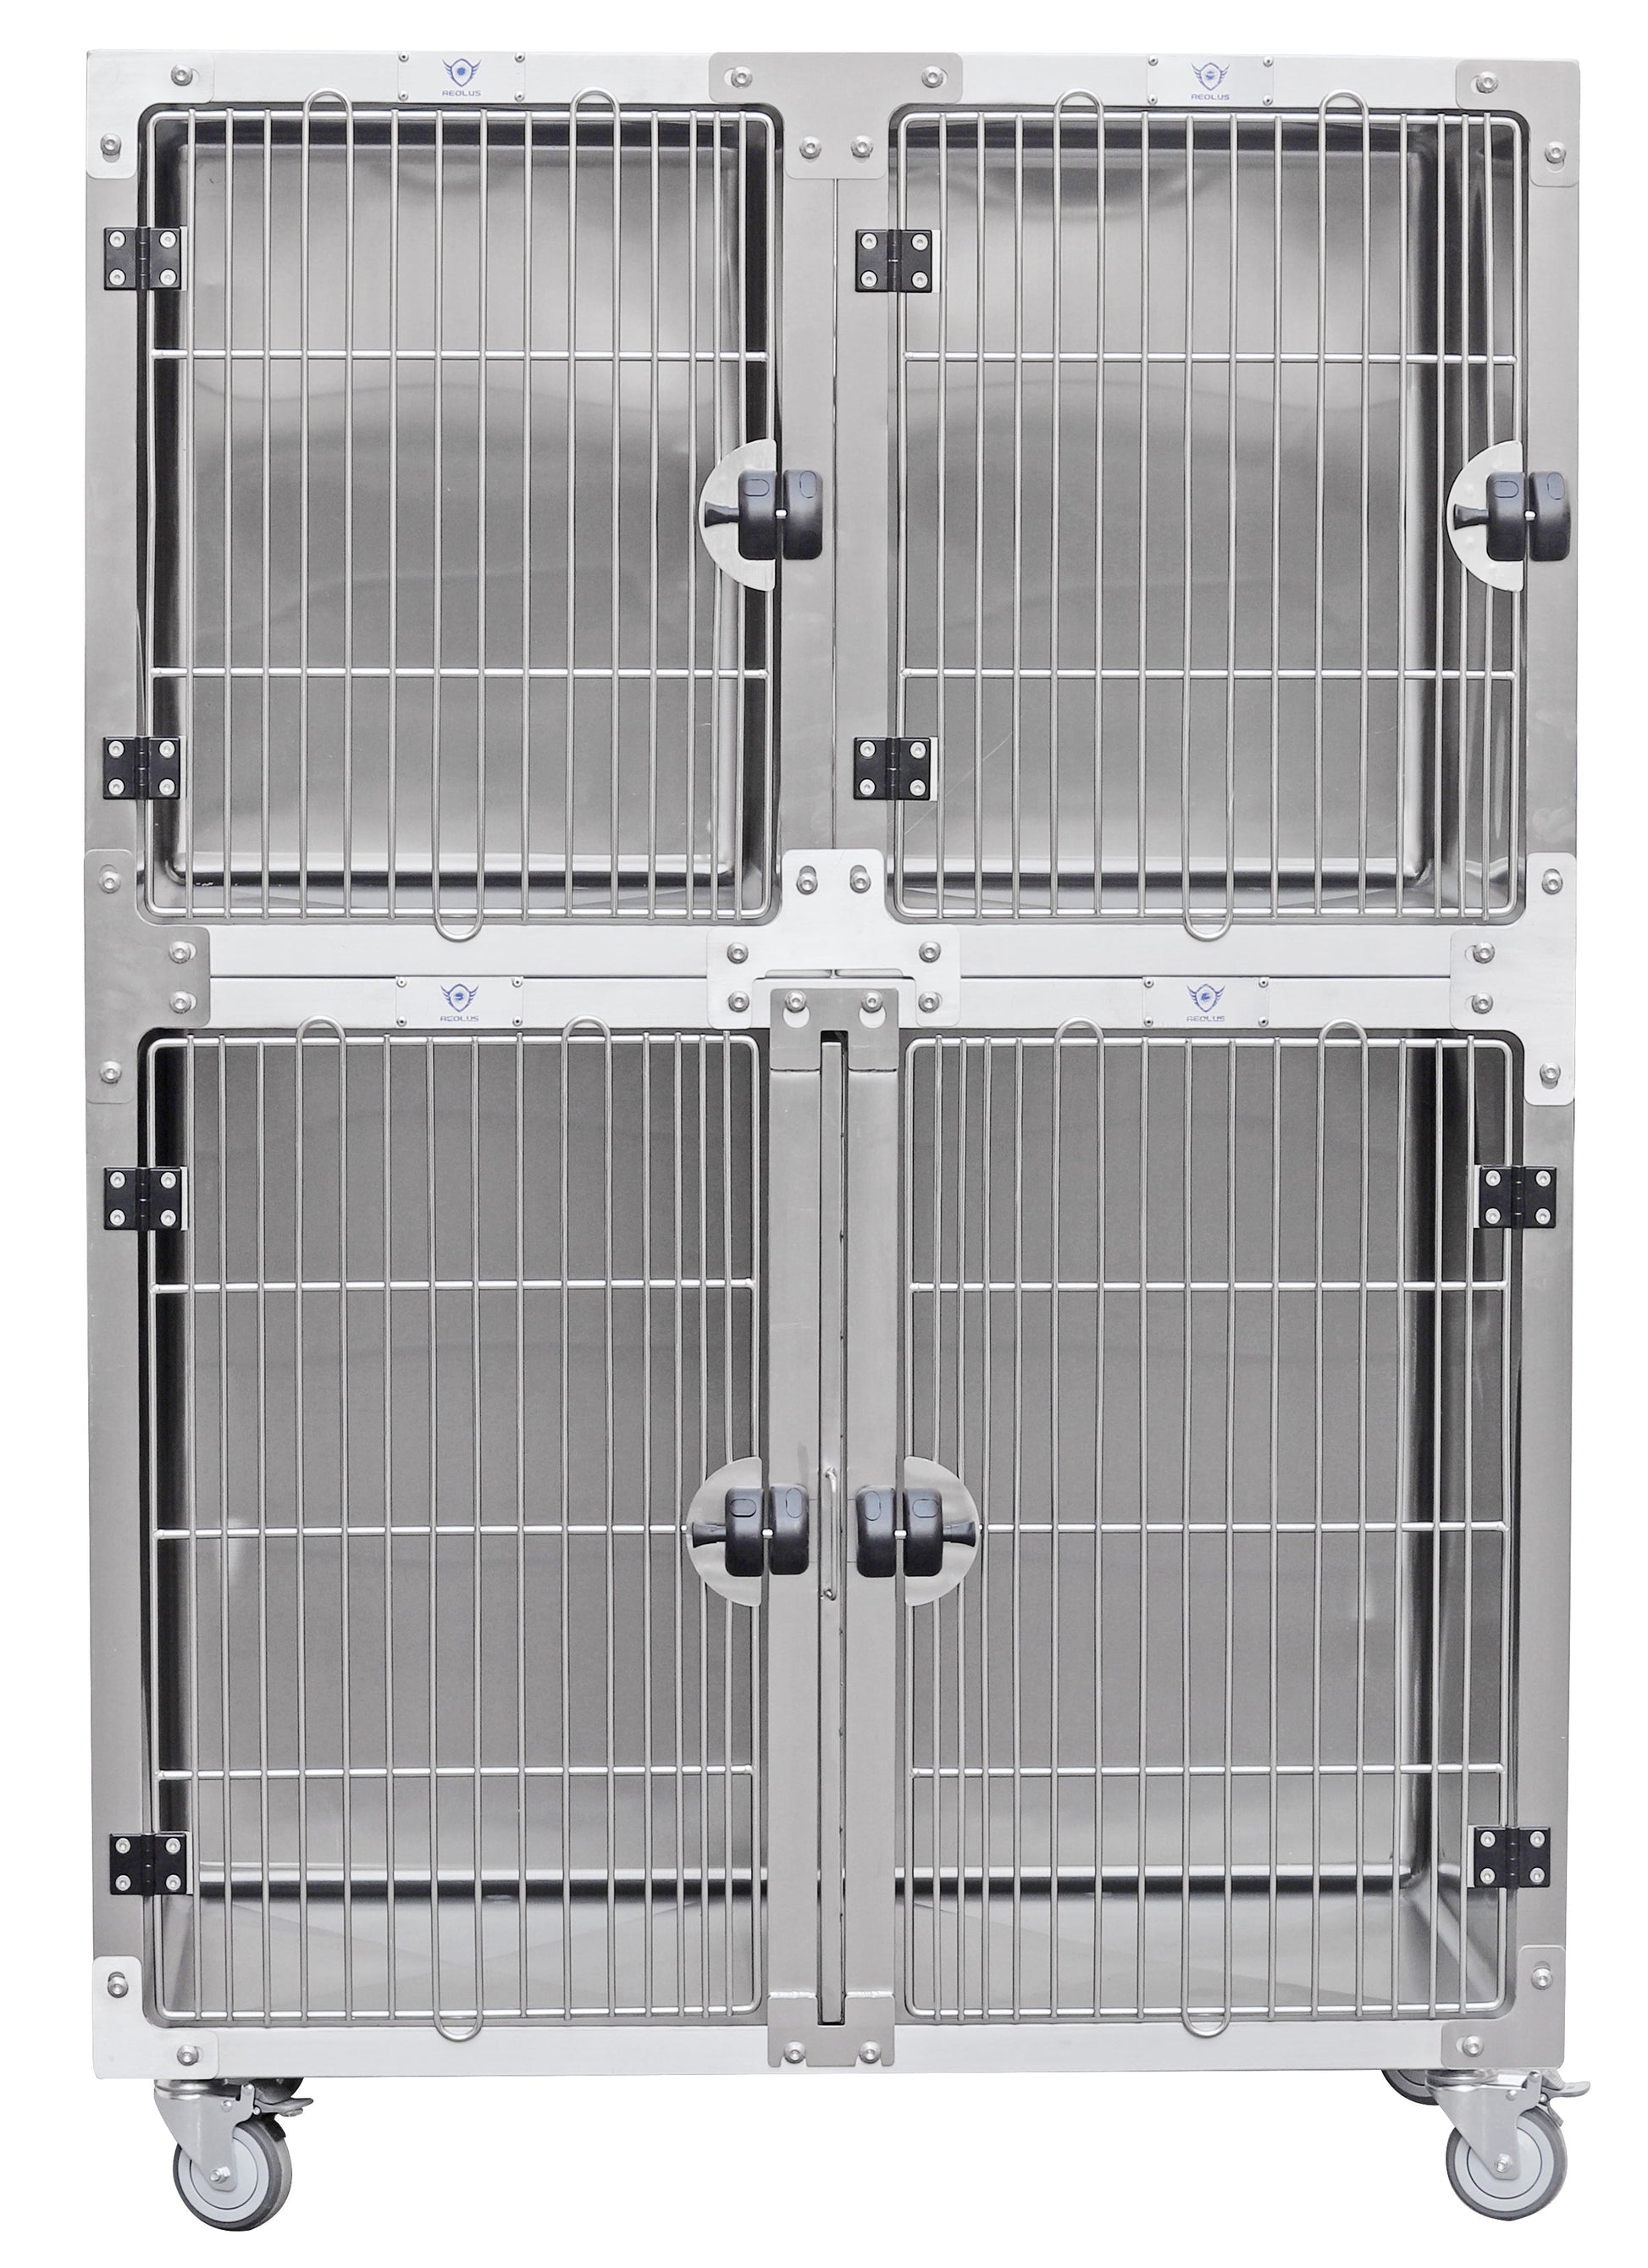 Aeolus Seamless Stainless Steel Cage Bank With Noise Dampening Technology-Cage Banks-Pet's Choice Supply